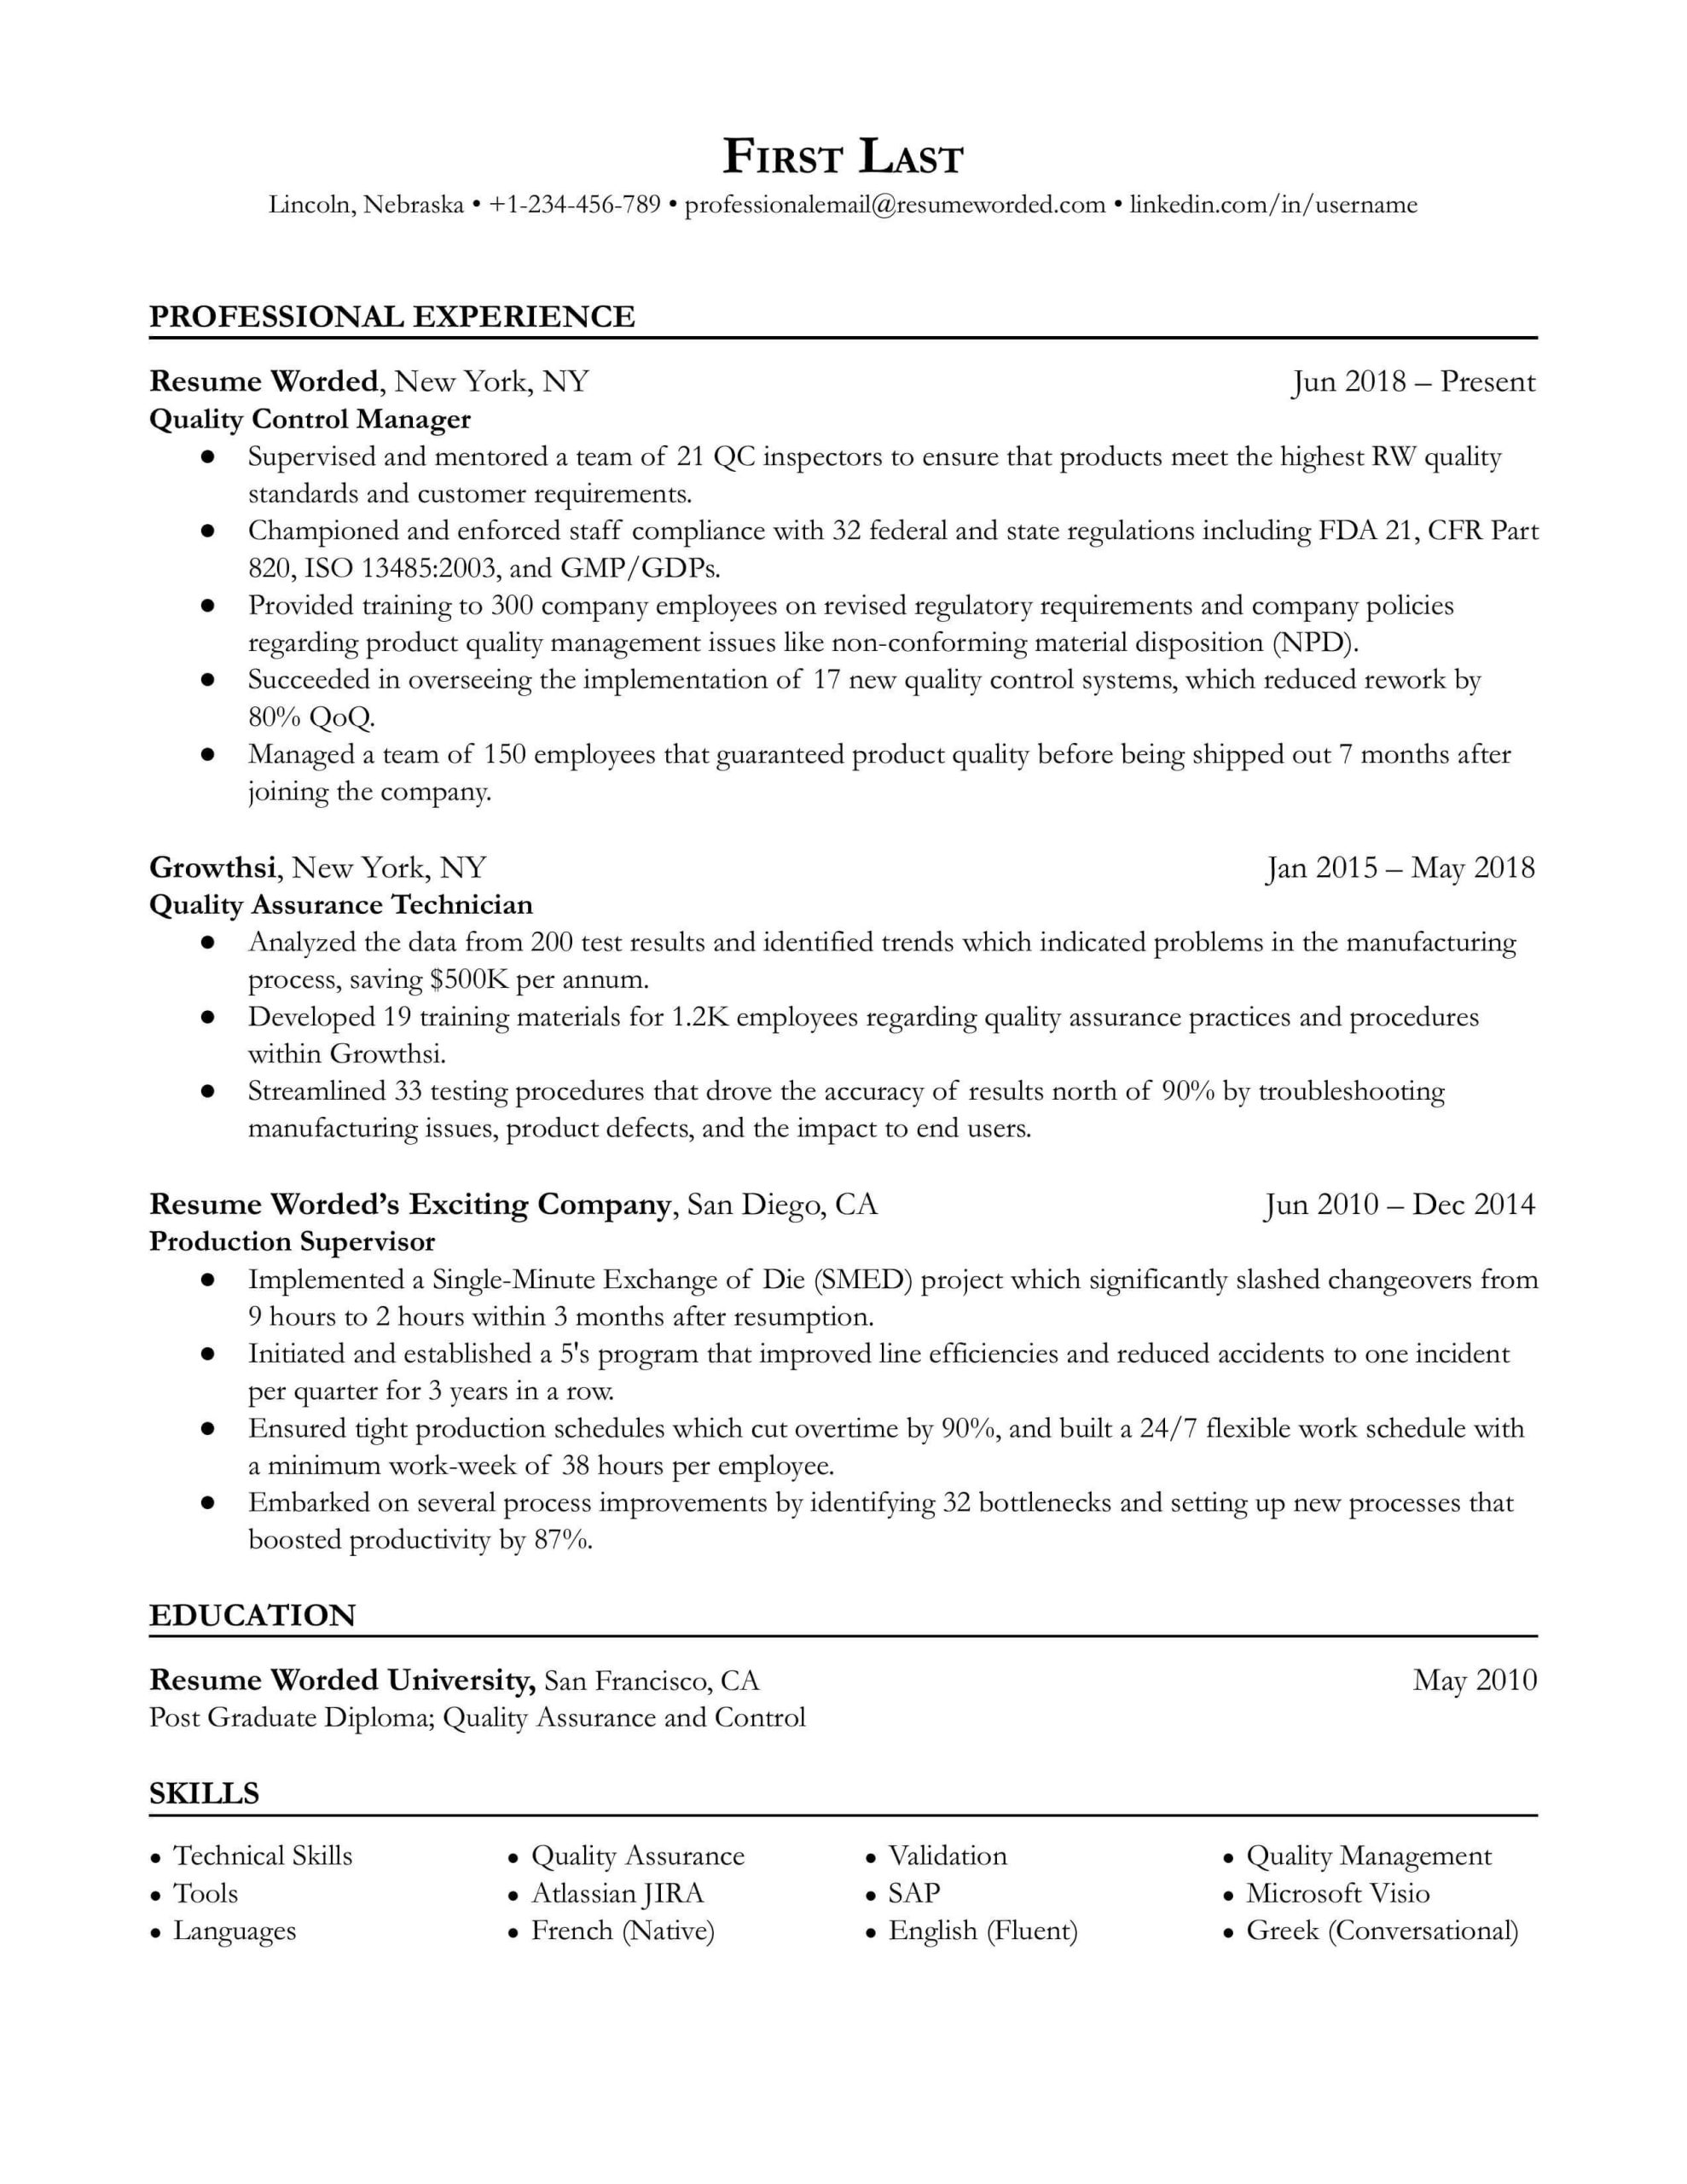 Bay area Quality assurance Resume Samples Quality Control Manager Resume Example for 2022 Resume Worded